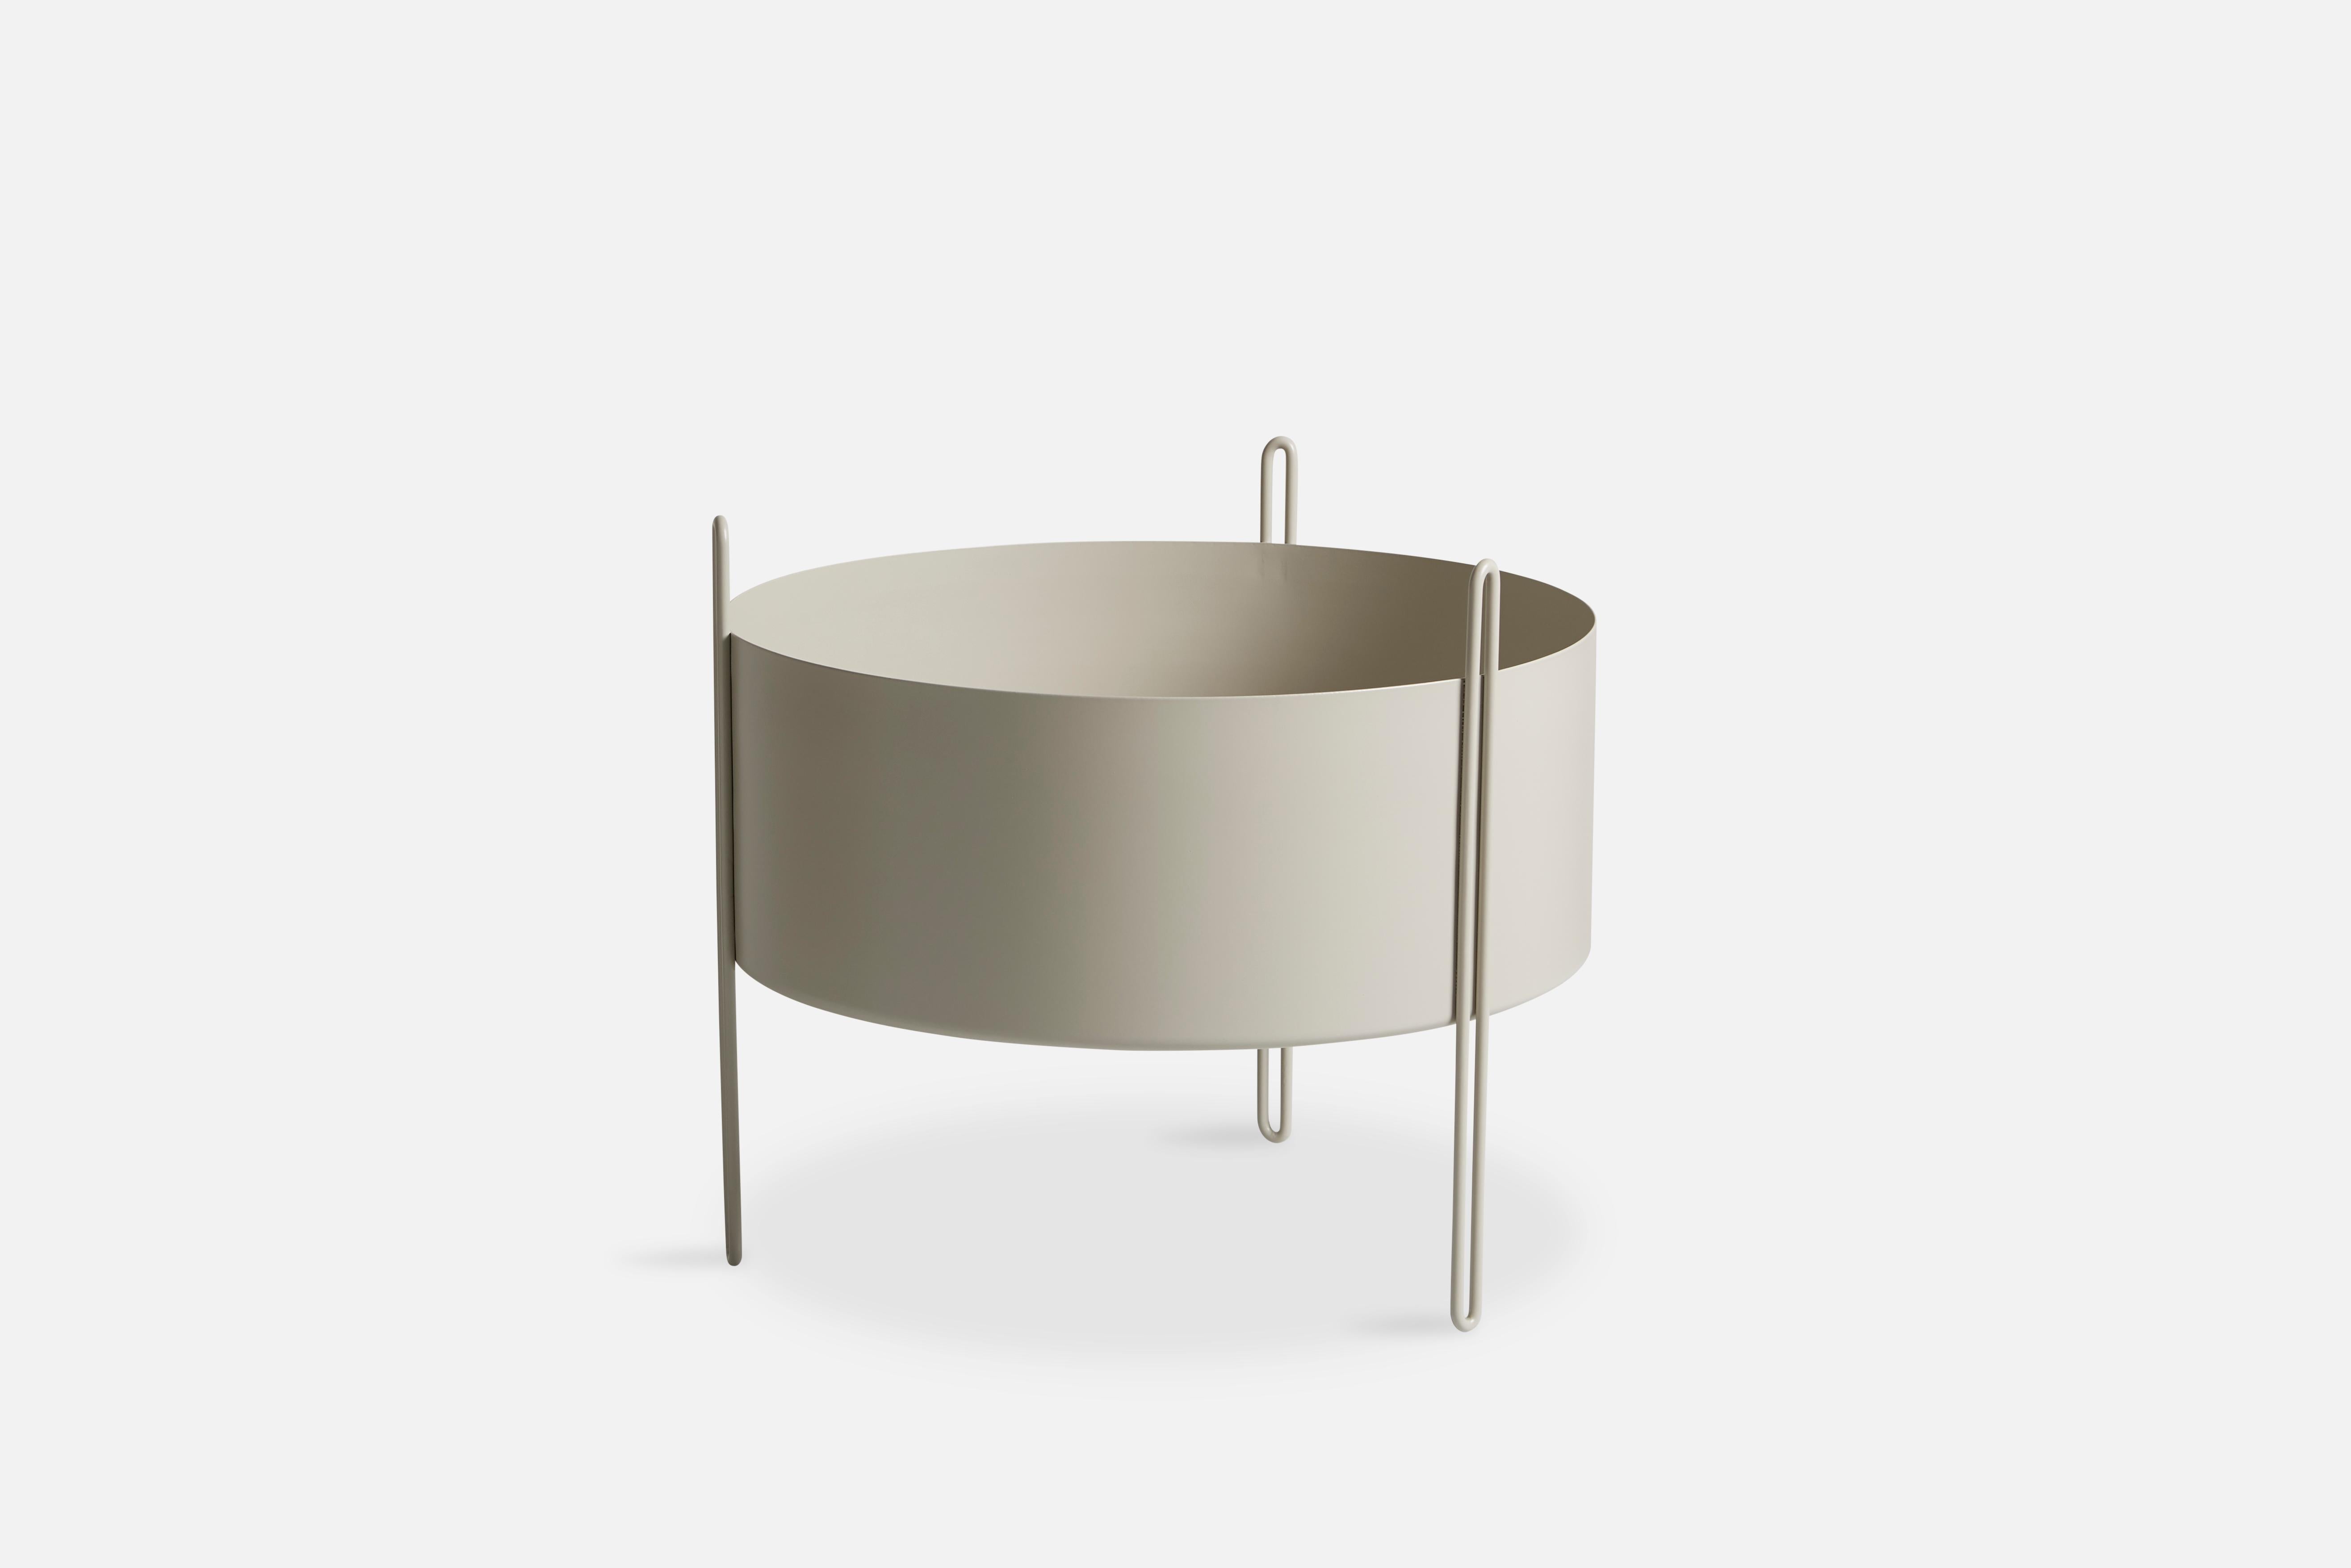 Medium grey Pidestall planter by Emilie Stahl Carlsen
Materials: Metal.
Dimensions: D 40 x H 35 cm
Available in grey, taupe or black and in 3 sizes: D 15 x H 15, D 40 x H 35, D 40 x H 55 cm.

Emilie Stahl Carlsen is a Norwegian designer who